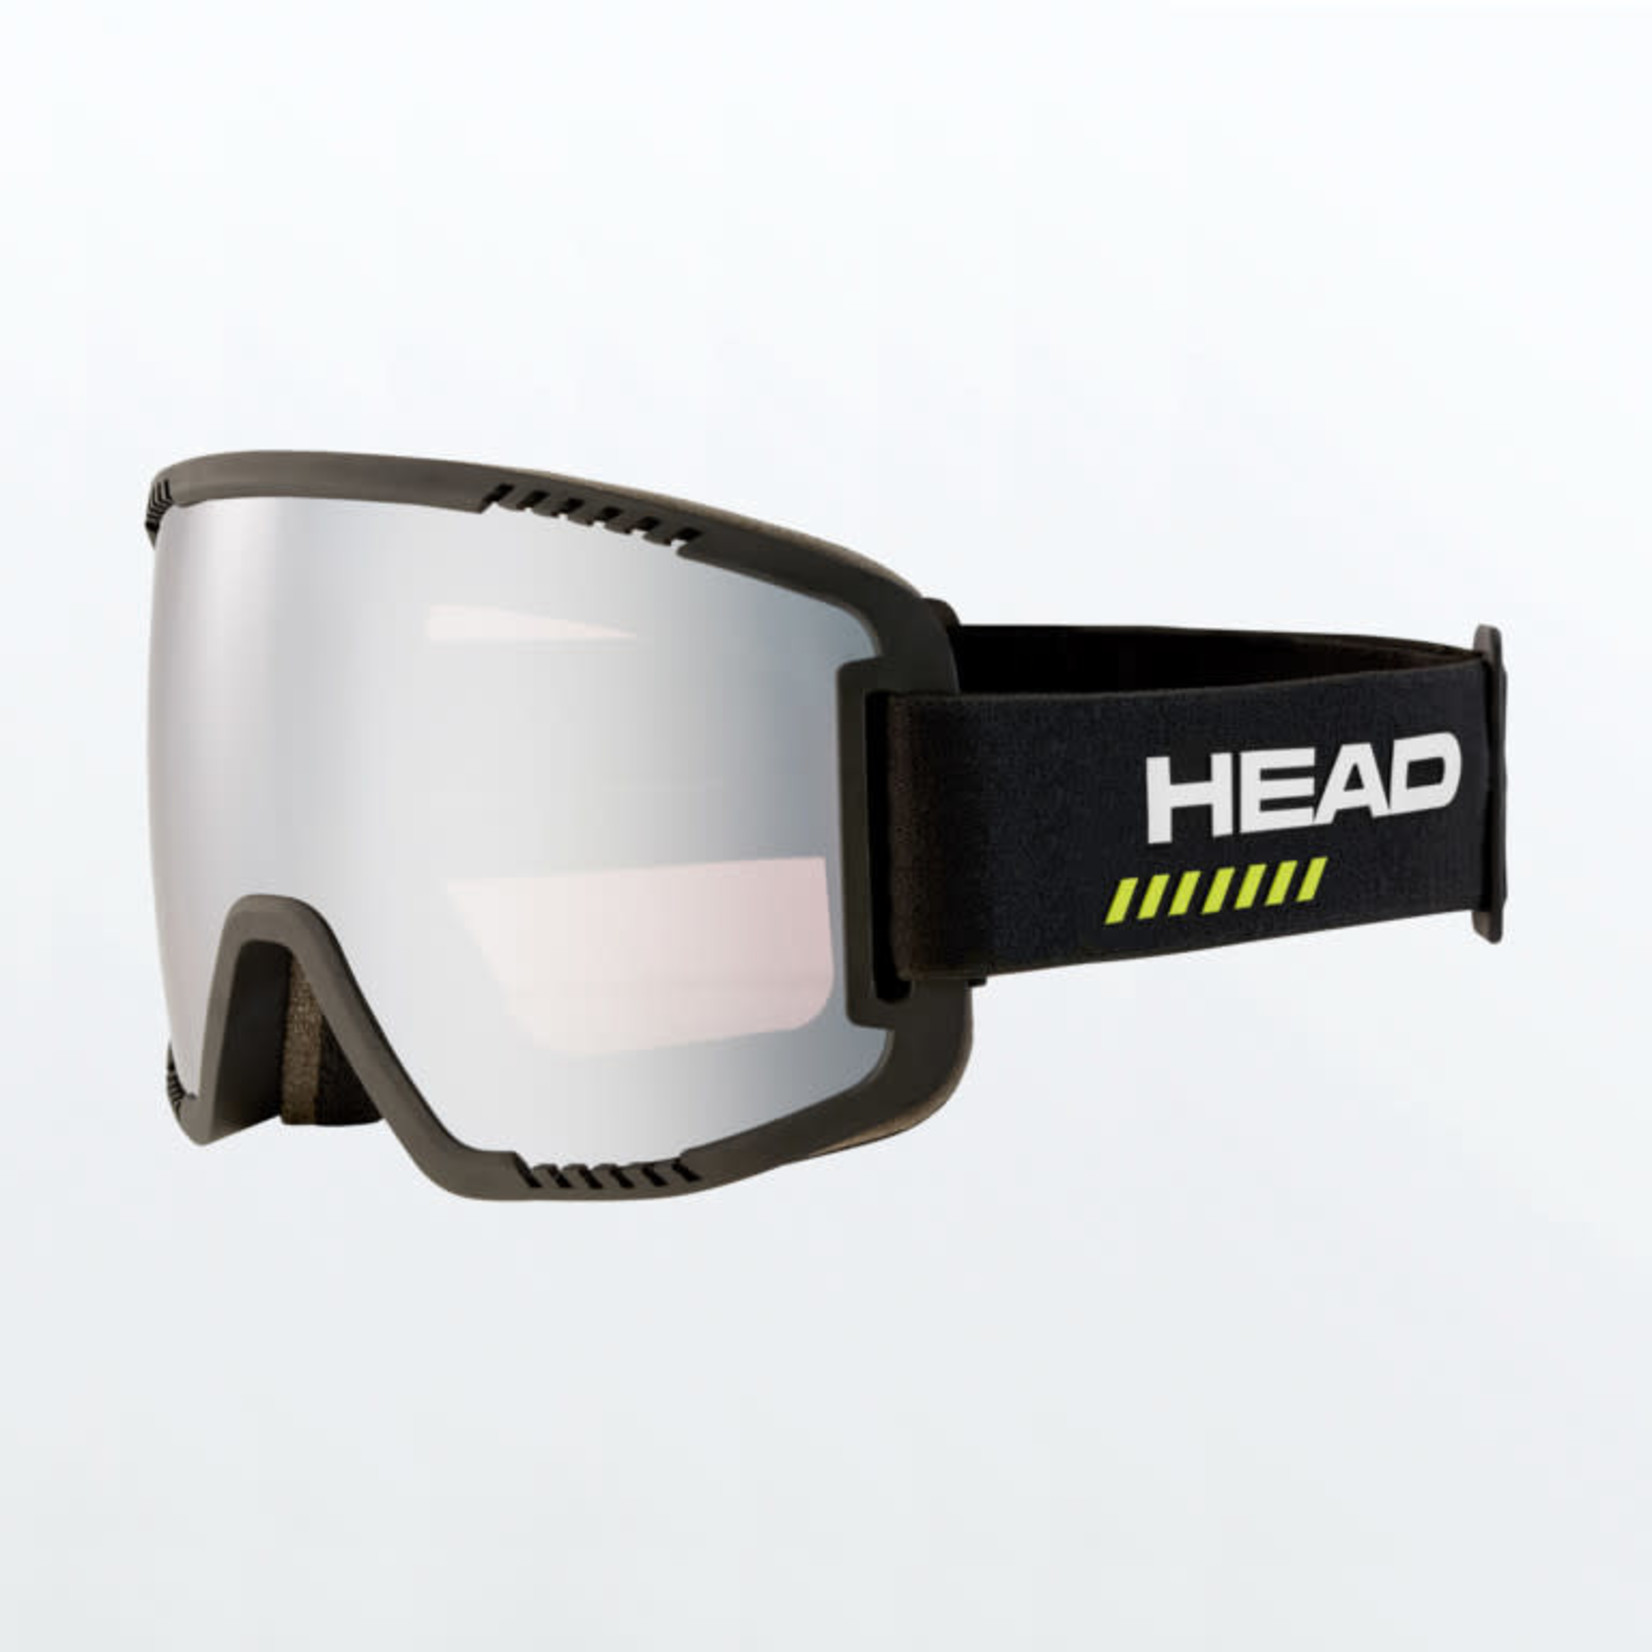 HEAD HEAD CONTEX PRO 5K RACE GOGGLES  WITH SPARE LENS CHROME BLACK LARGE